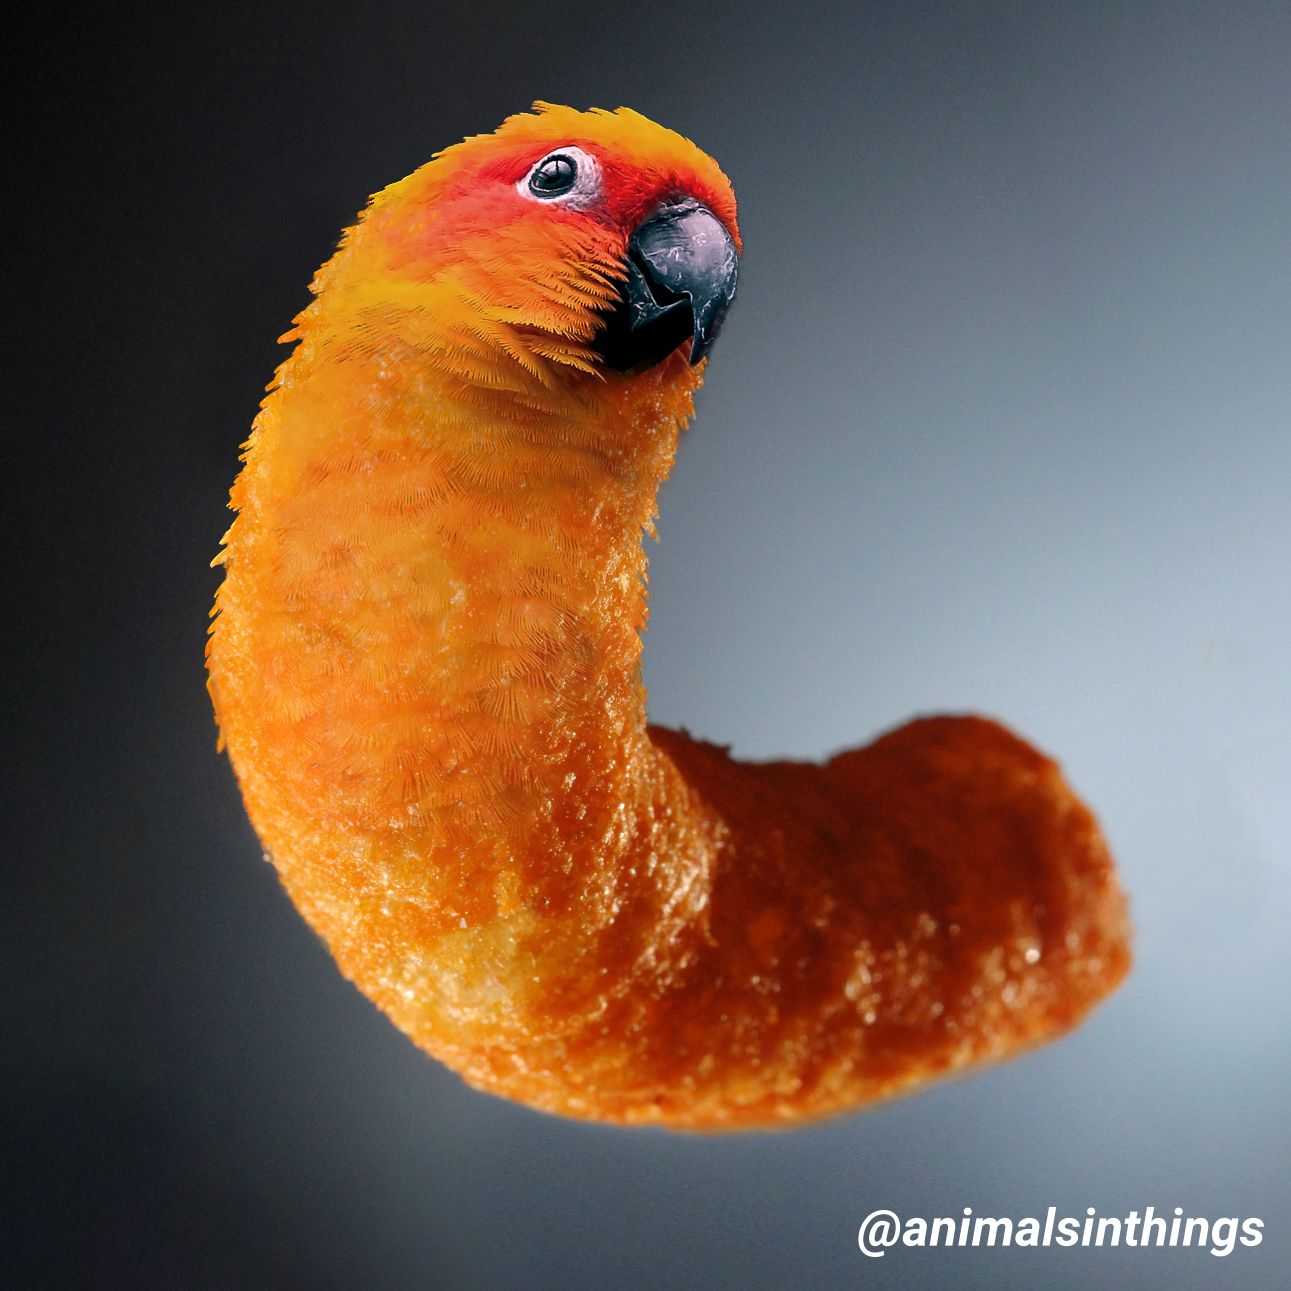 I photoshopped a Parrot into a Cheeto because why not?